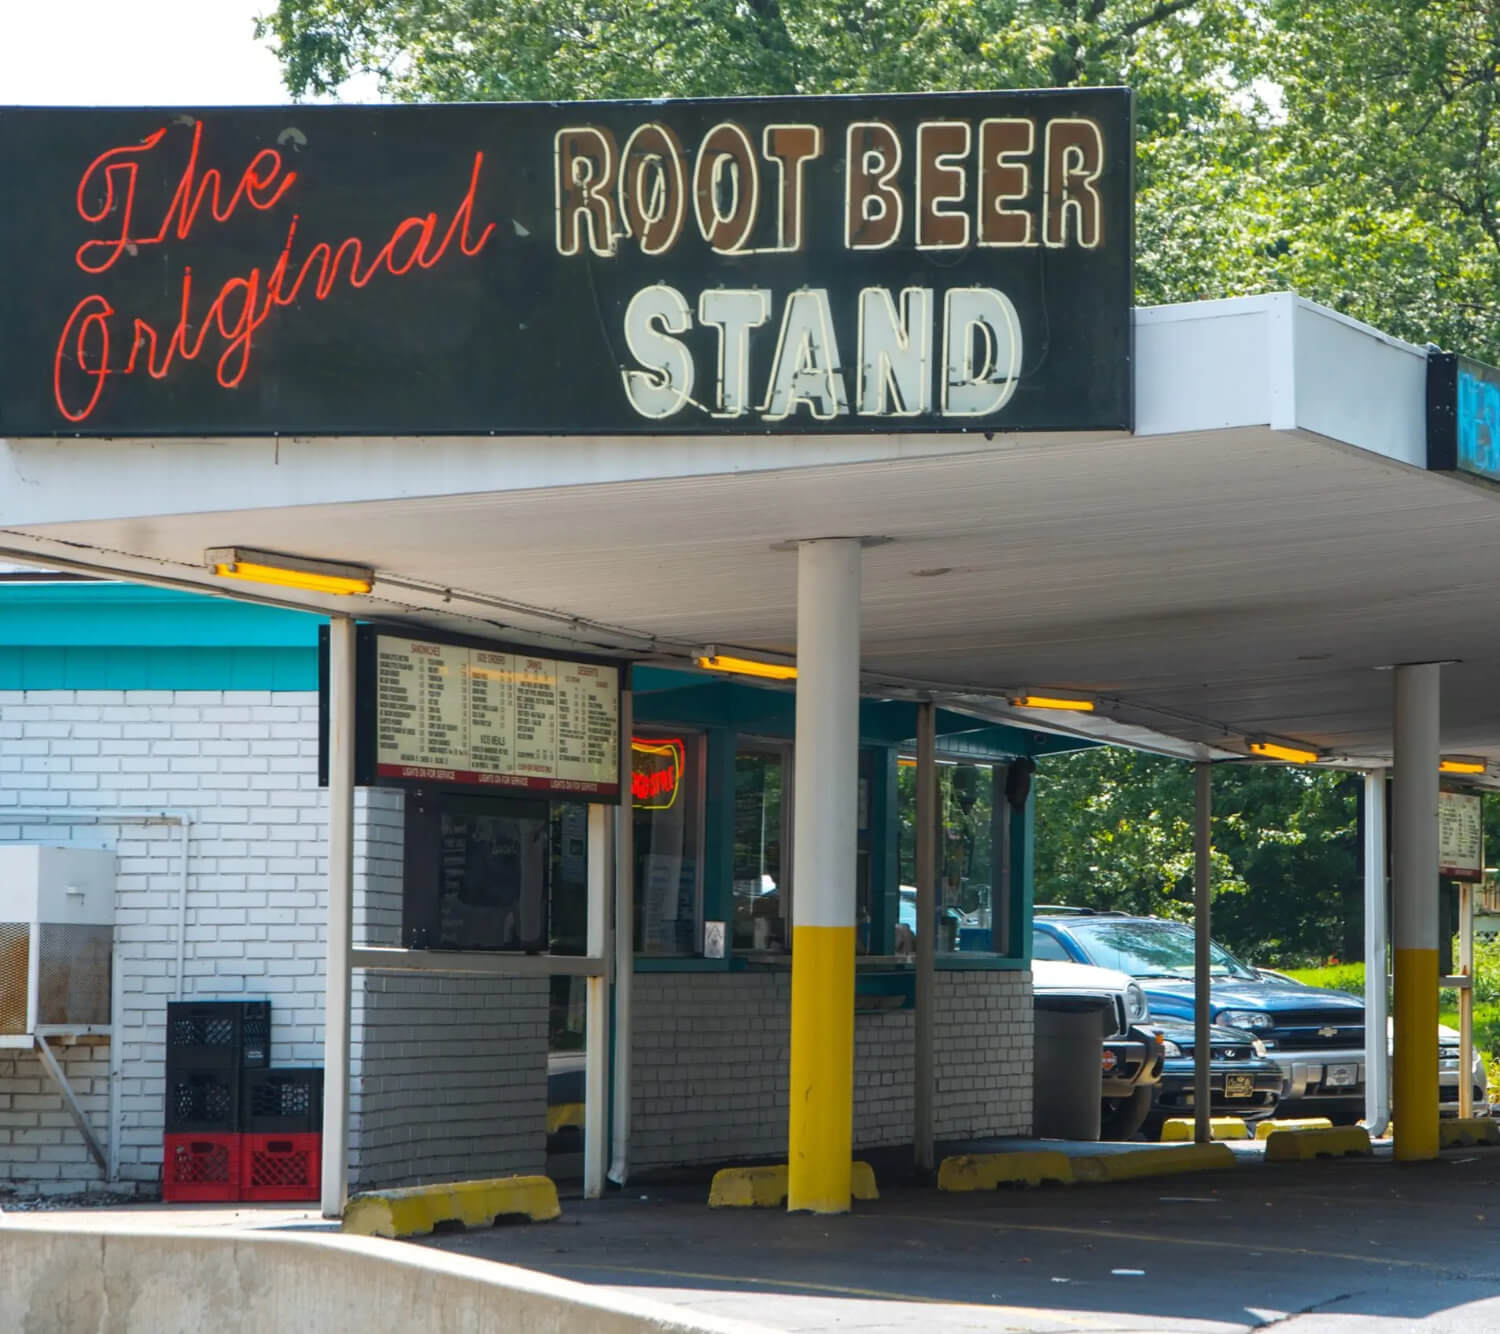 The Rootbeer Stand